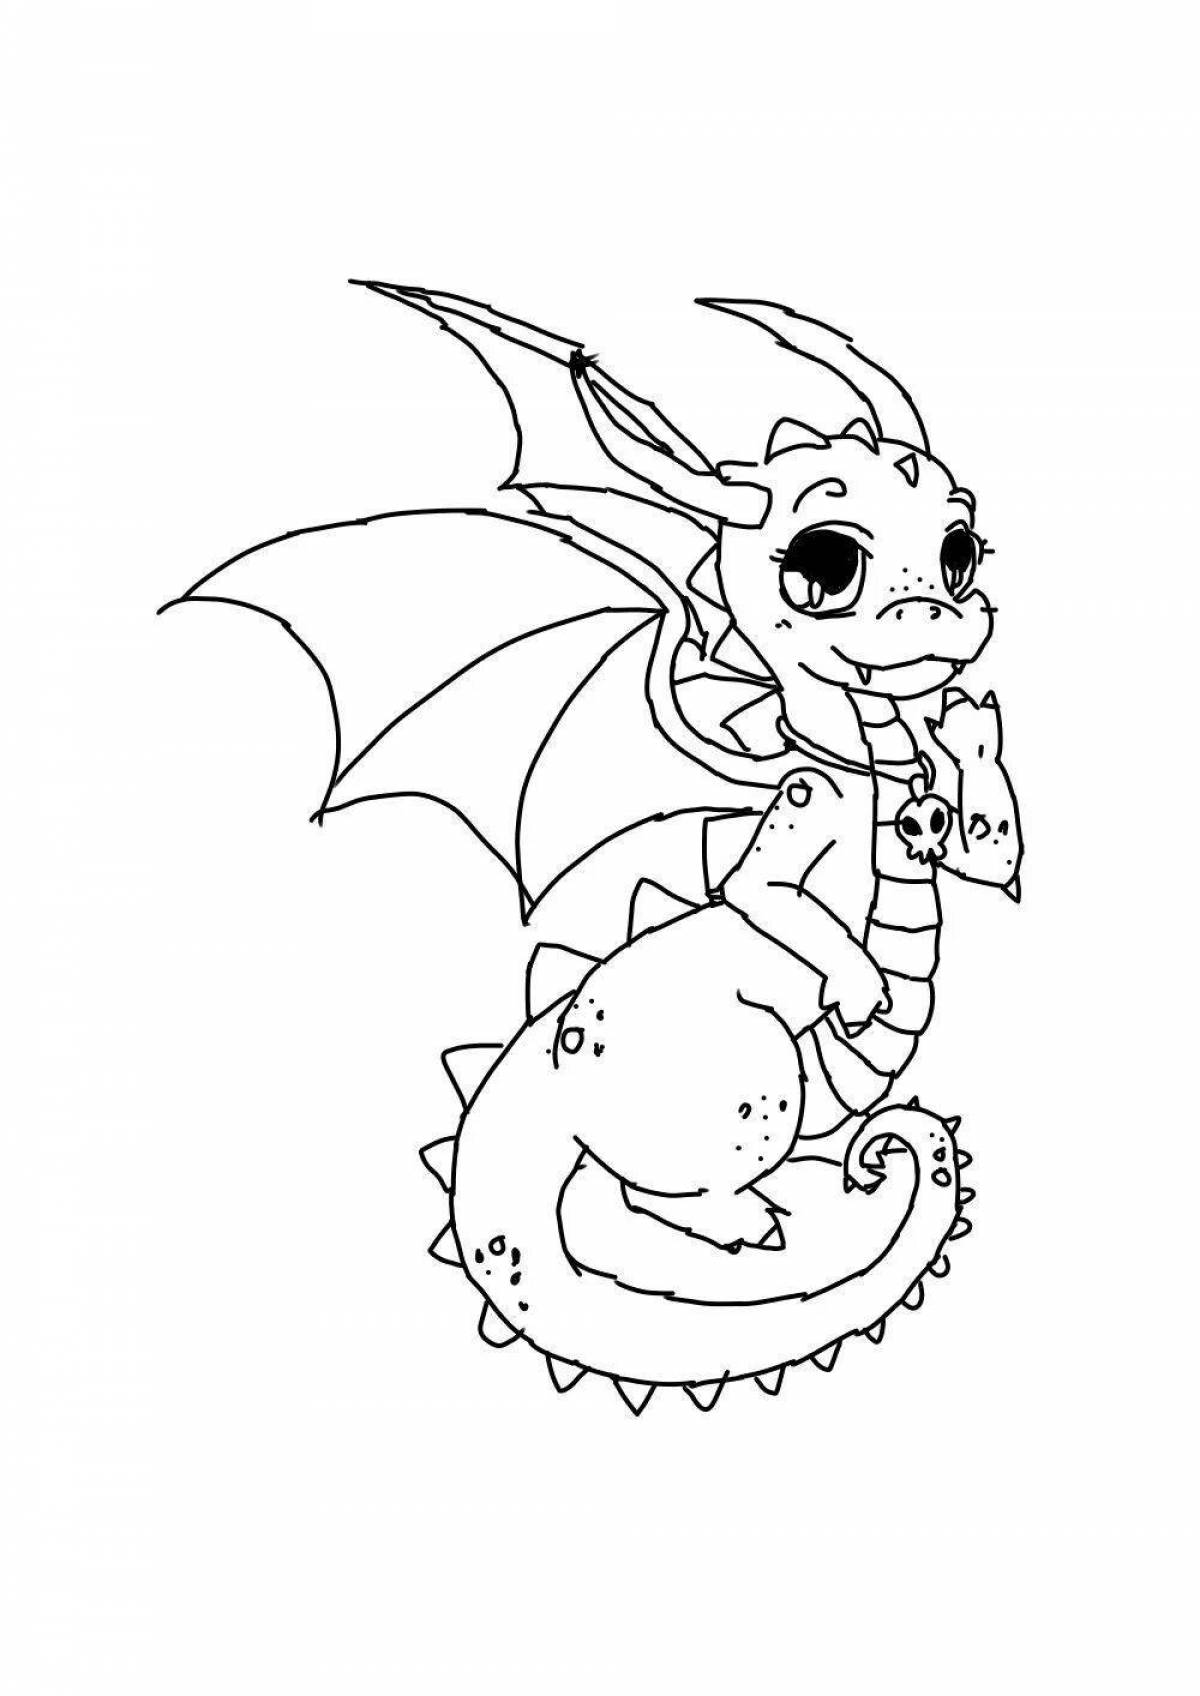 Charming dragon coloring page